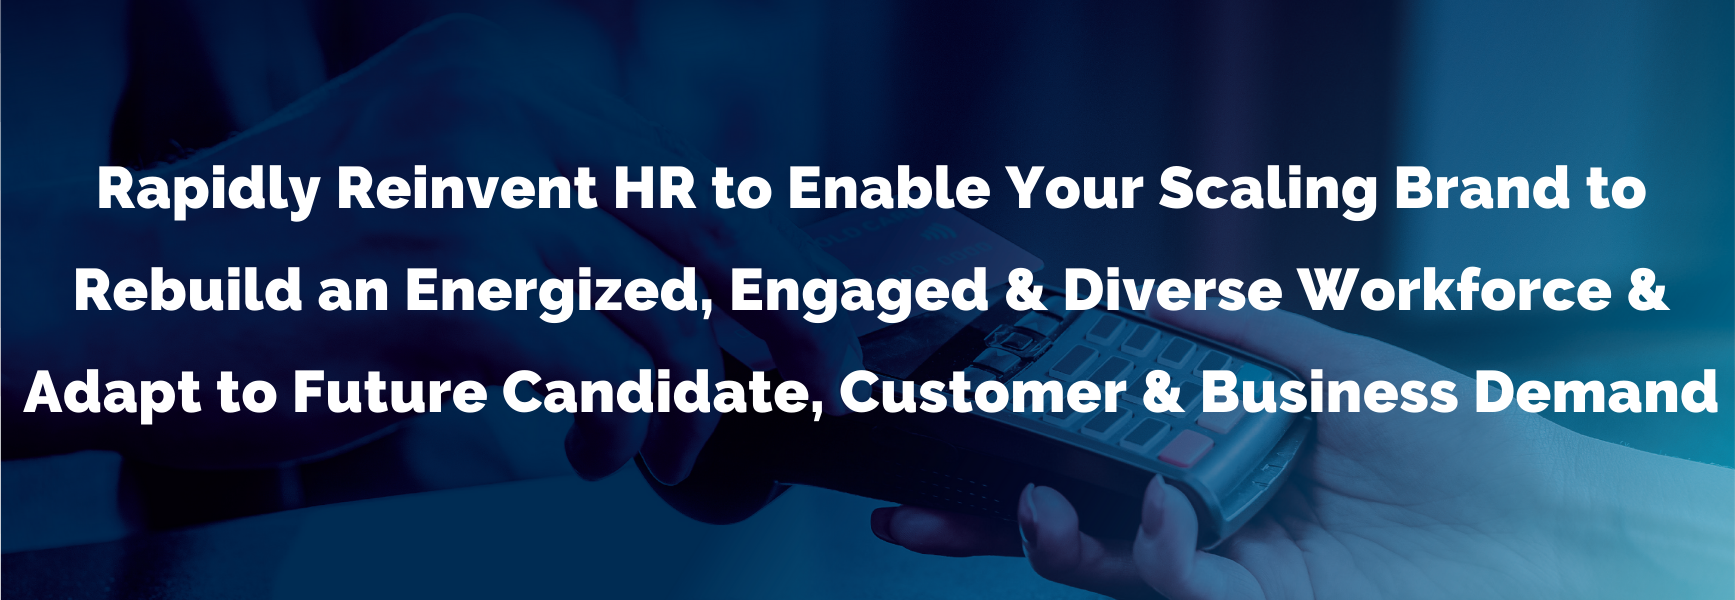 Rapidly Reinvent HR to Enable Your Scaling Brand to Rebuild an Energized, Engaged & Diverse Workforce & Adapt to Future Candidate, Customer & Business Demand